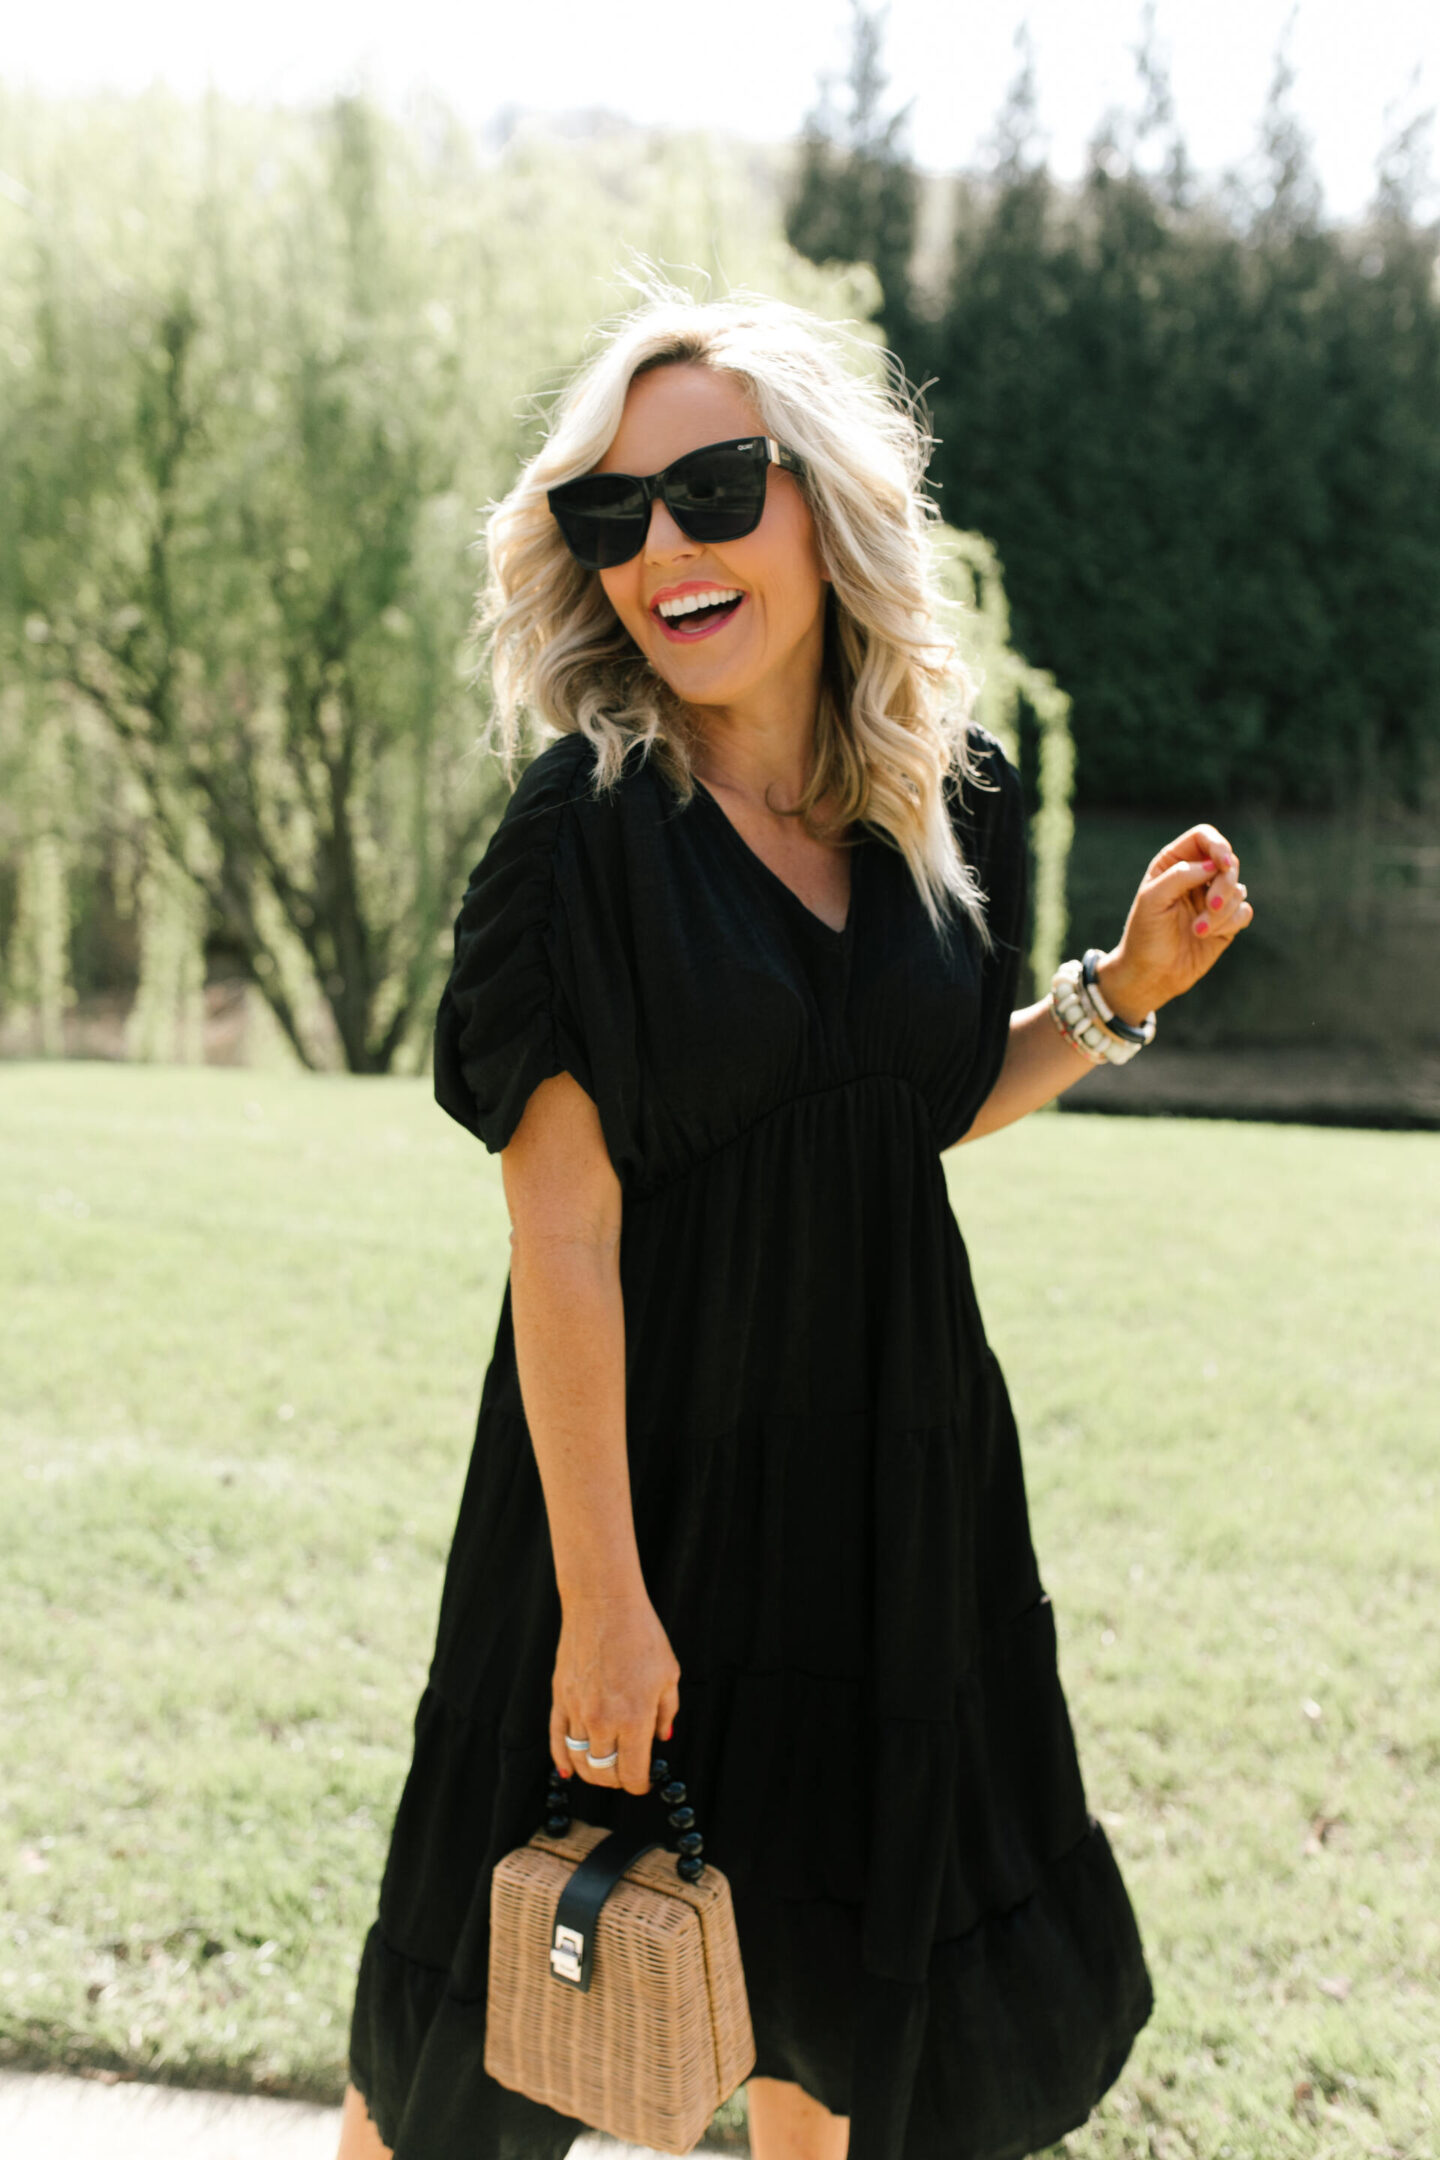 Summer Dresses by popular Nashville of Natasha Stoneking wearing a shirred tiered midi dress, after hours sunglasses, platform wedge sandals, and holding a woven bucket bag. 